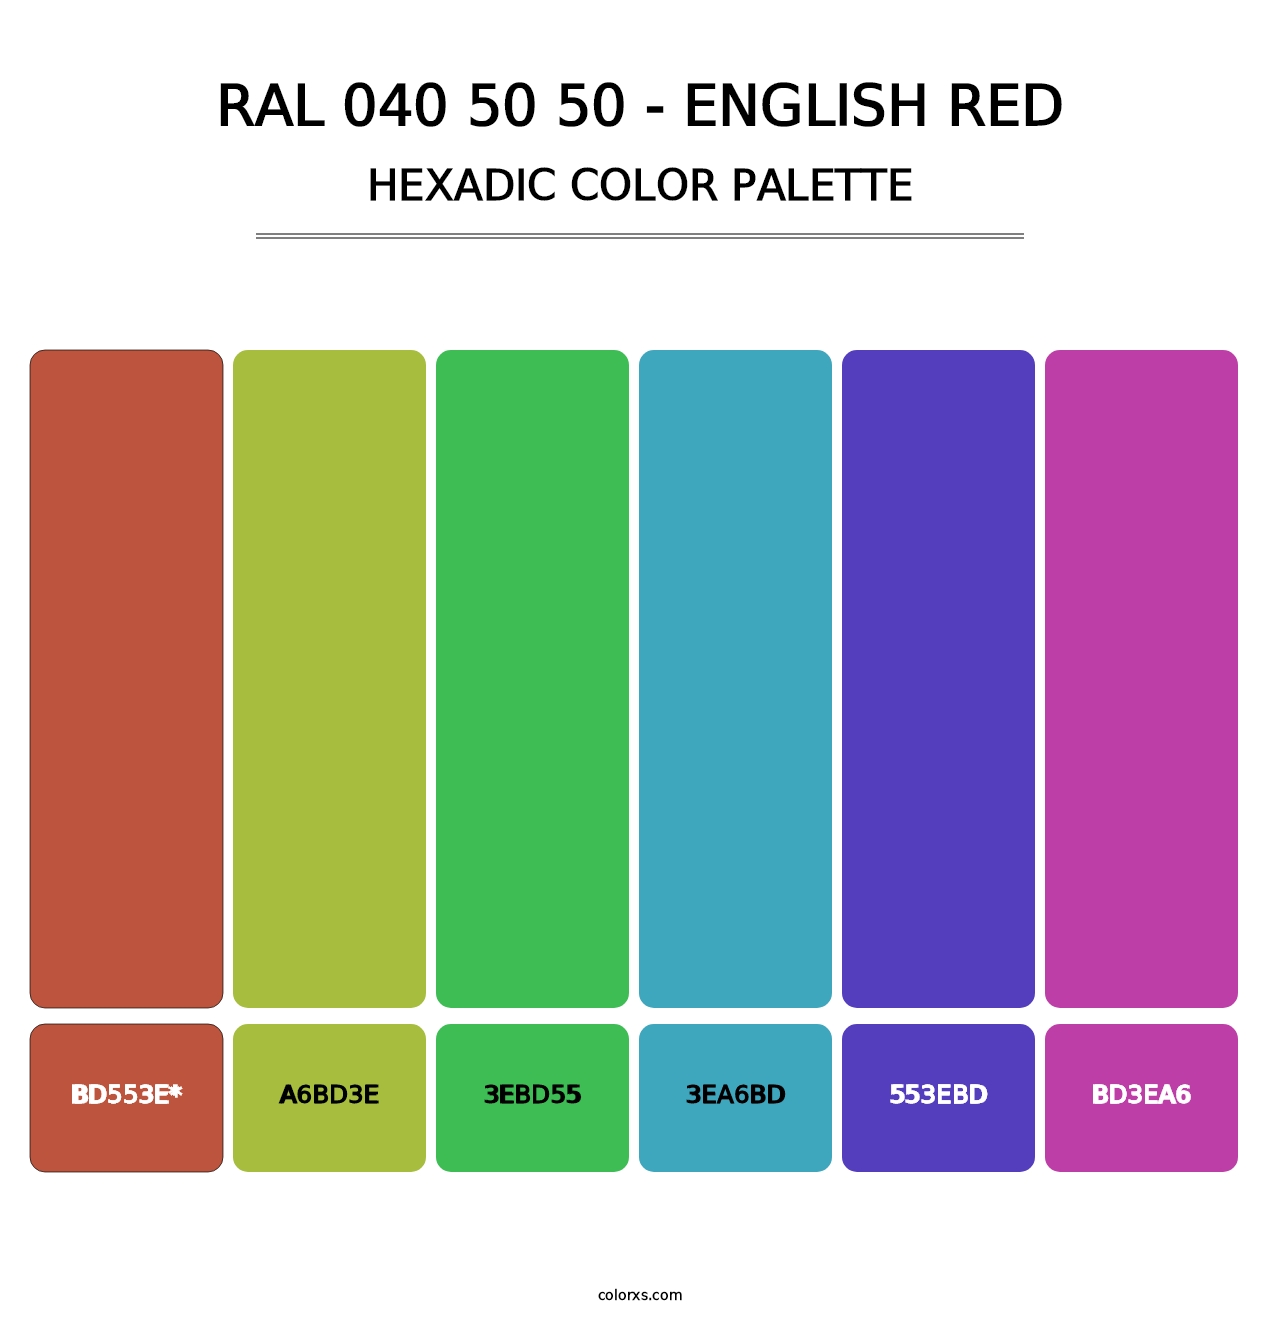 RAL 040 50 50 - English Red - Hexadic Color Palette